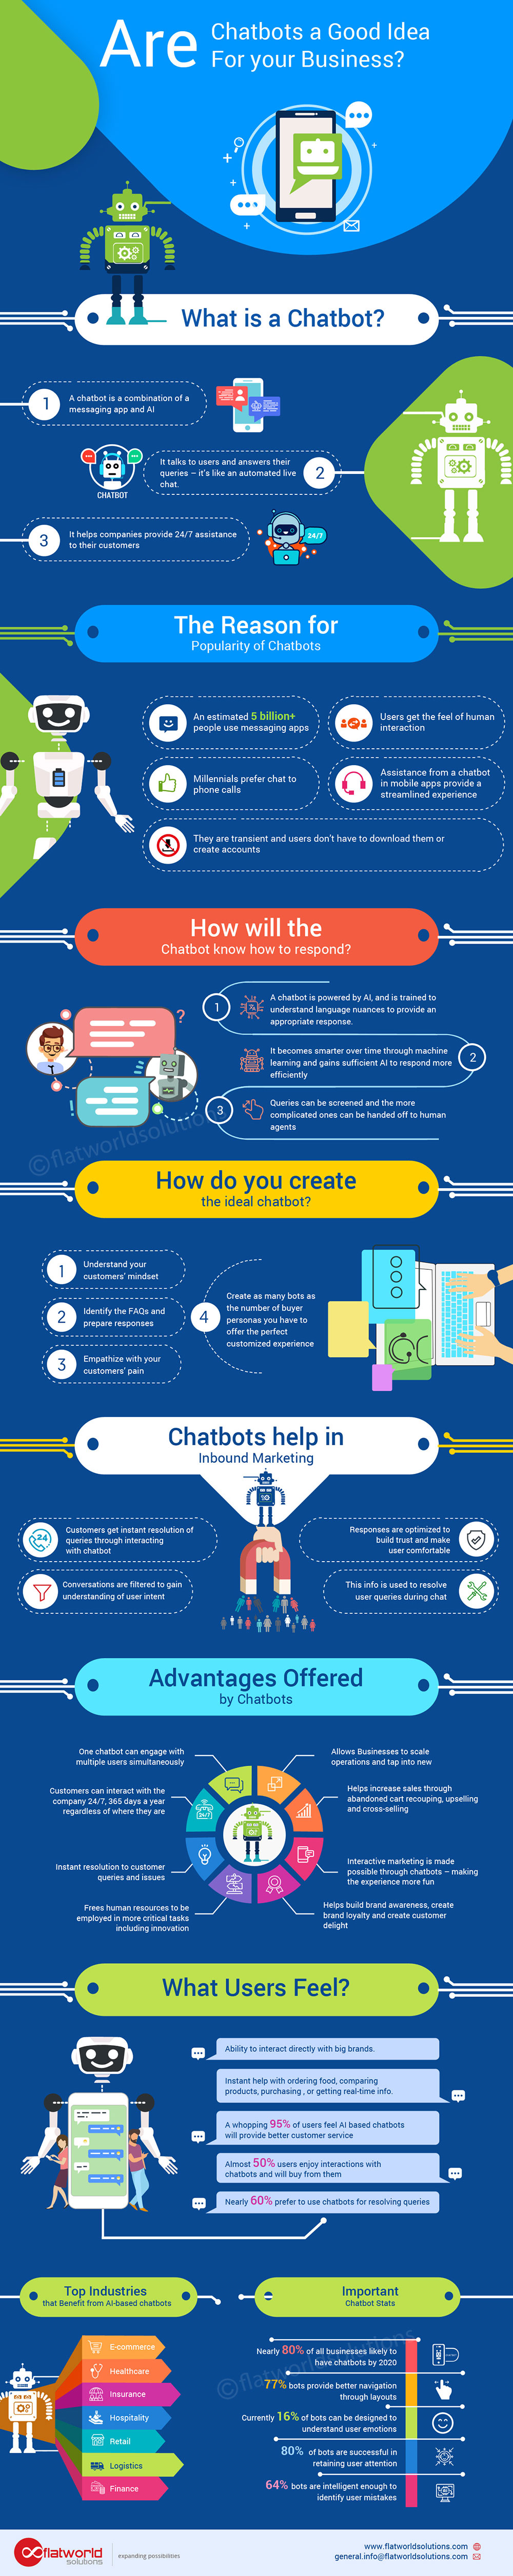 Infographics: Are Chatbots Good for your Business